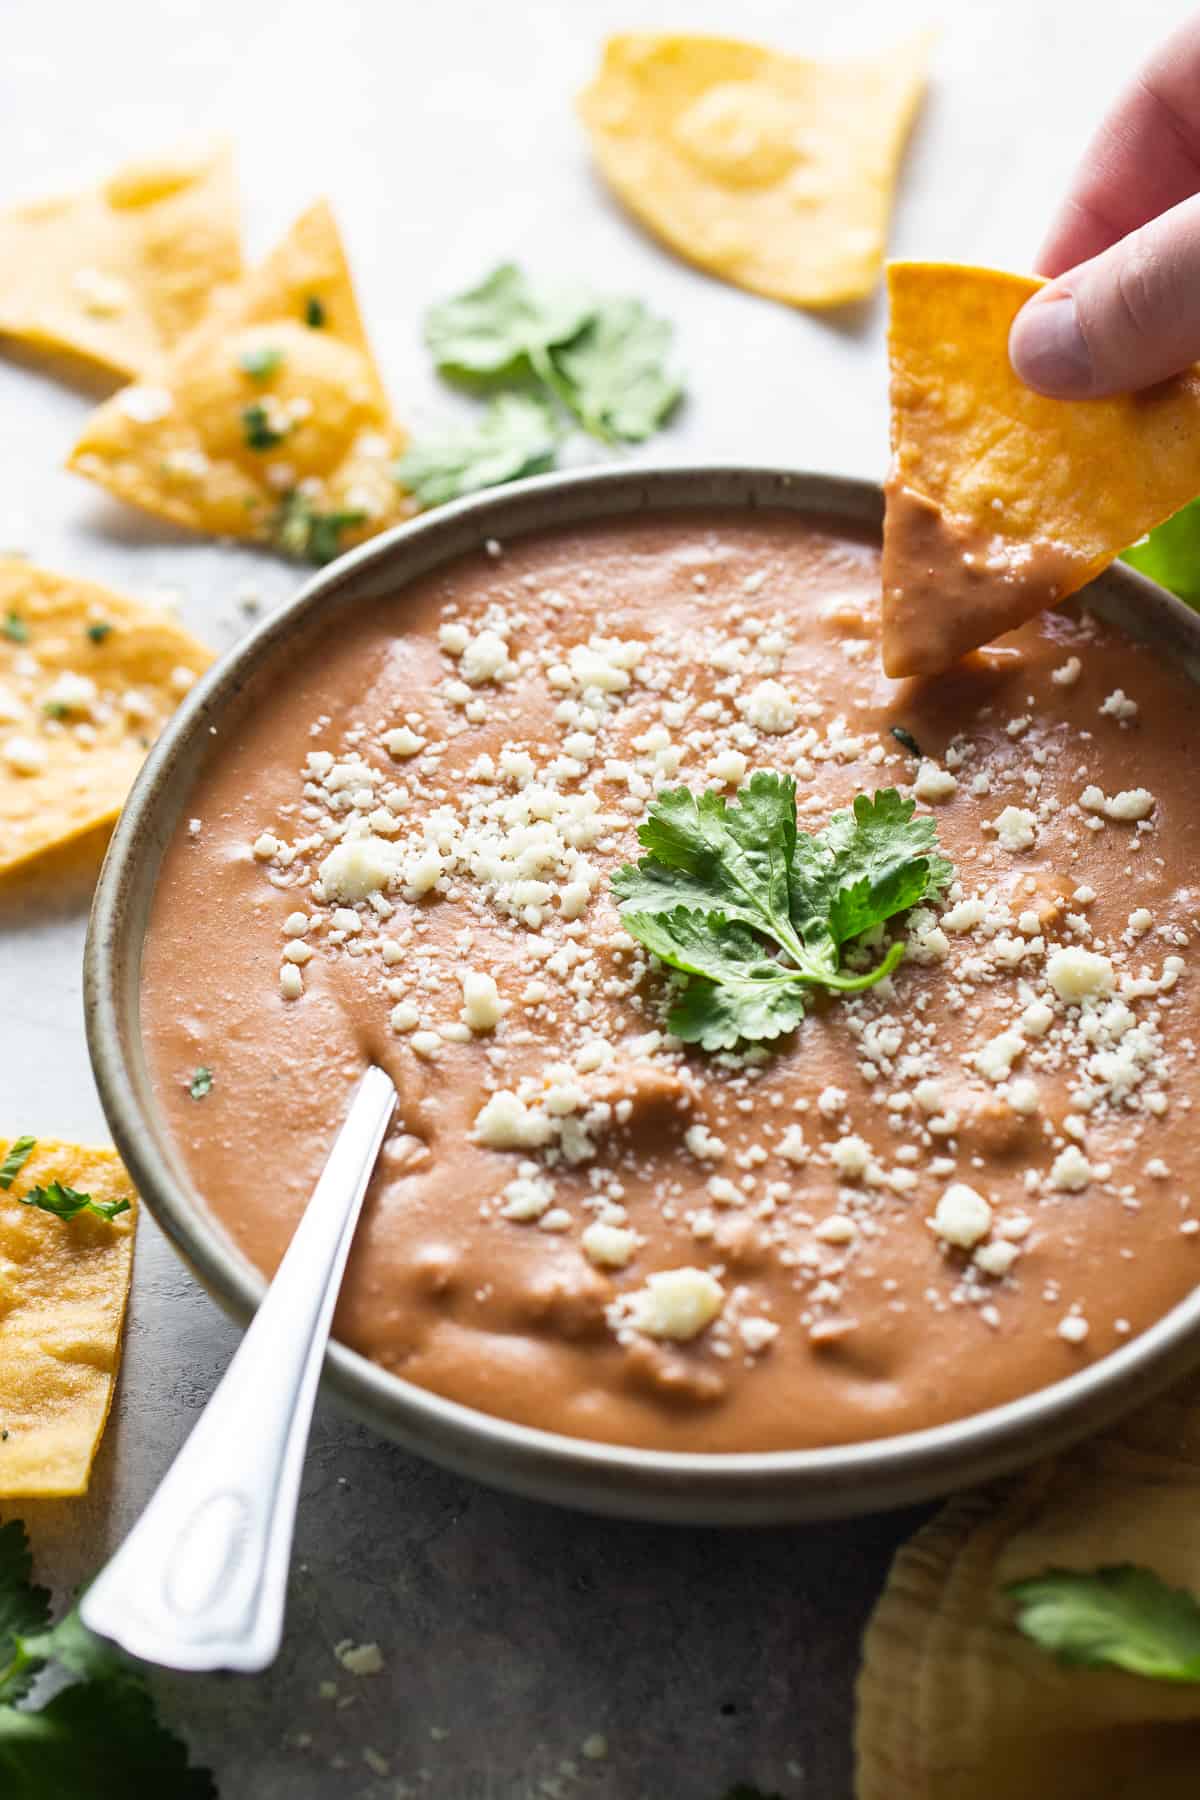 Frijoles puercos garnished with cotija cheese and cilantro in a bowl.